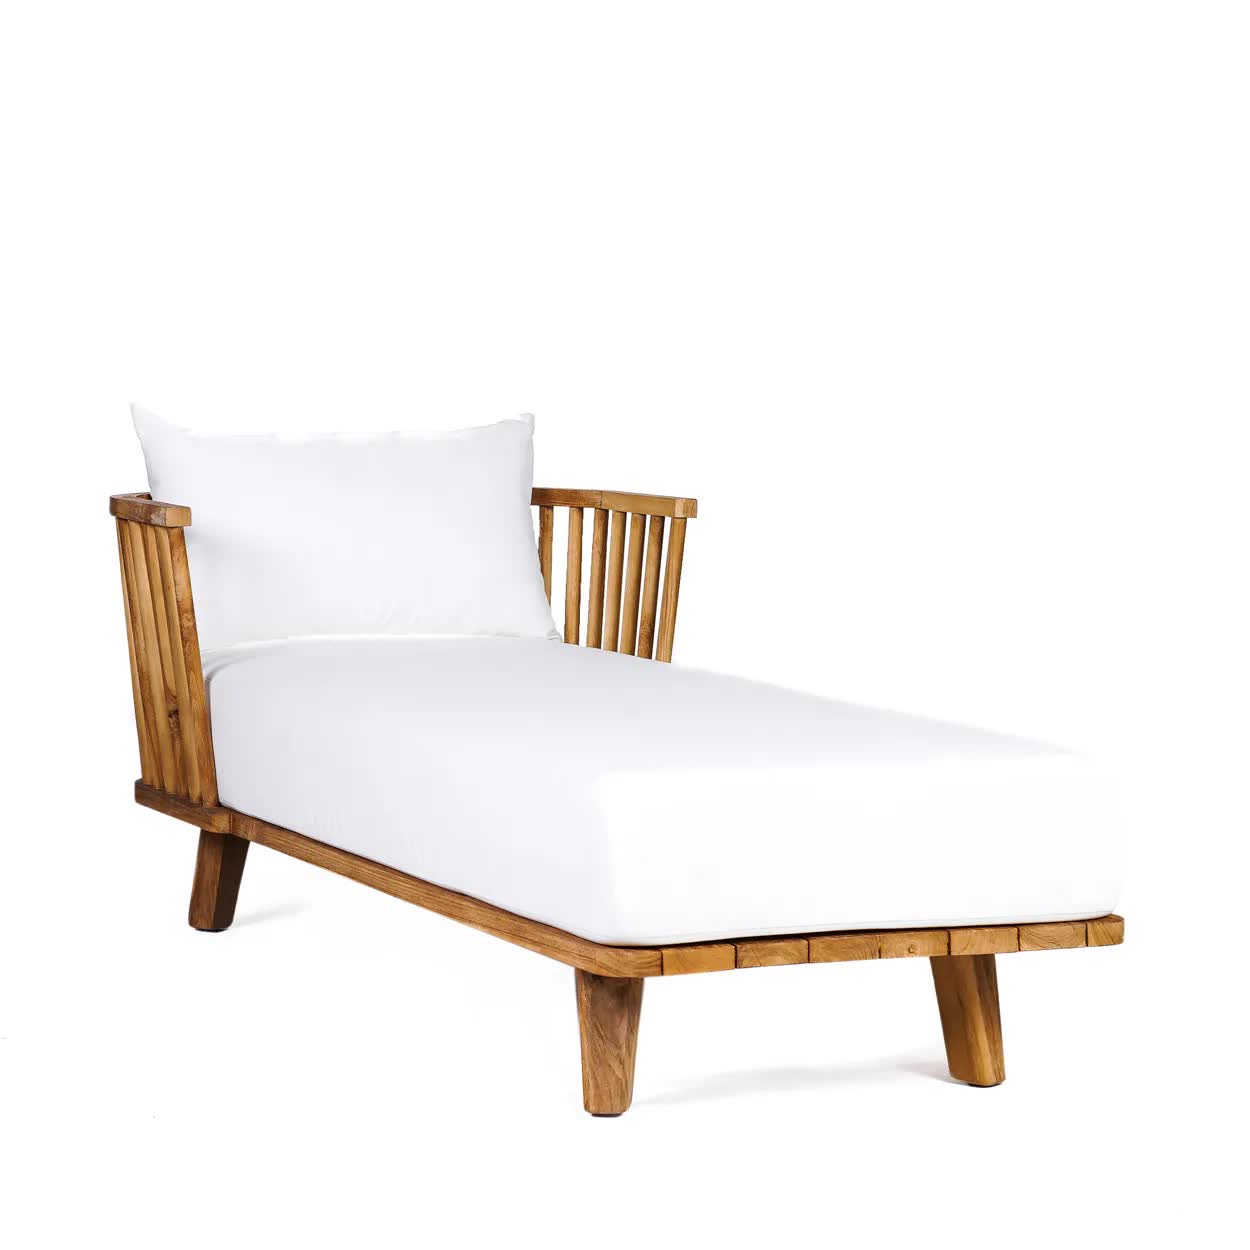 THE MALAWI Daybed Natural White